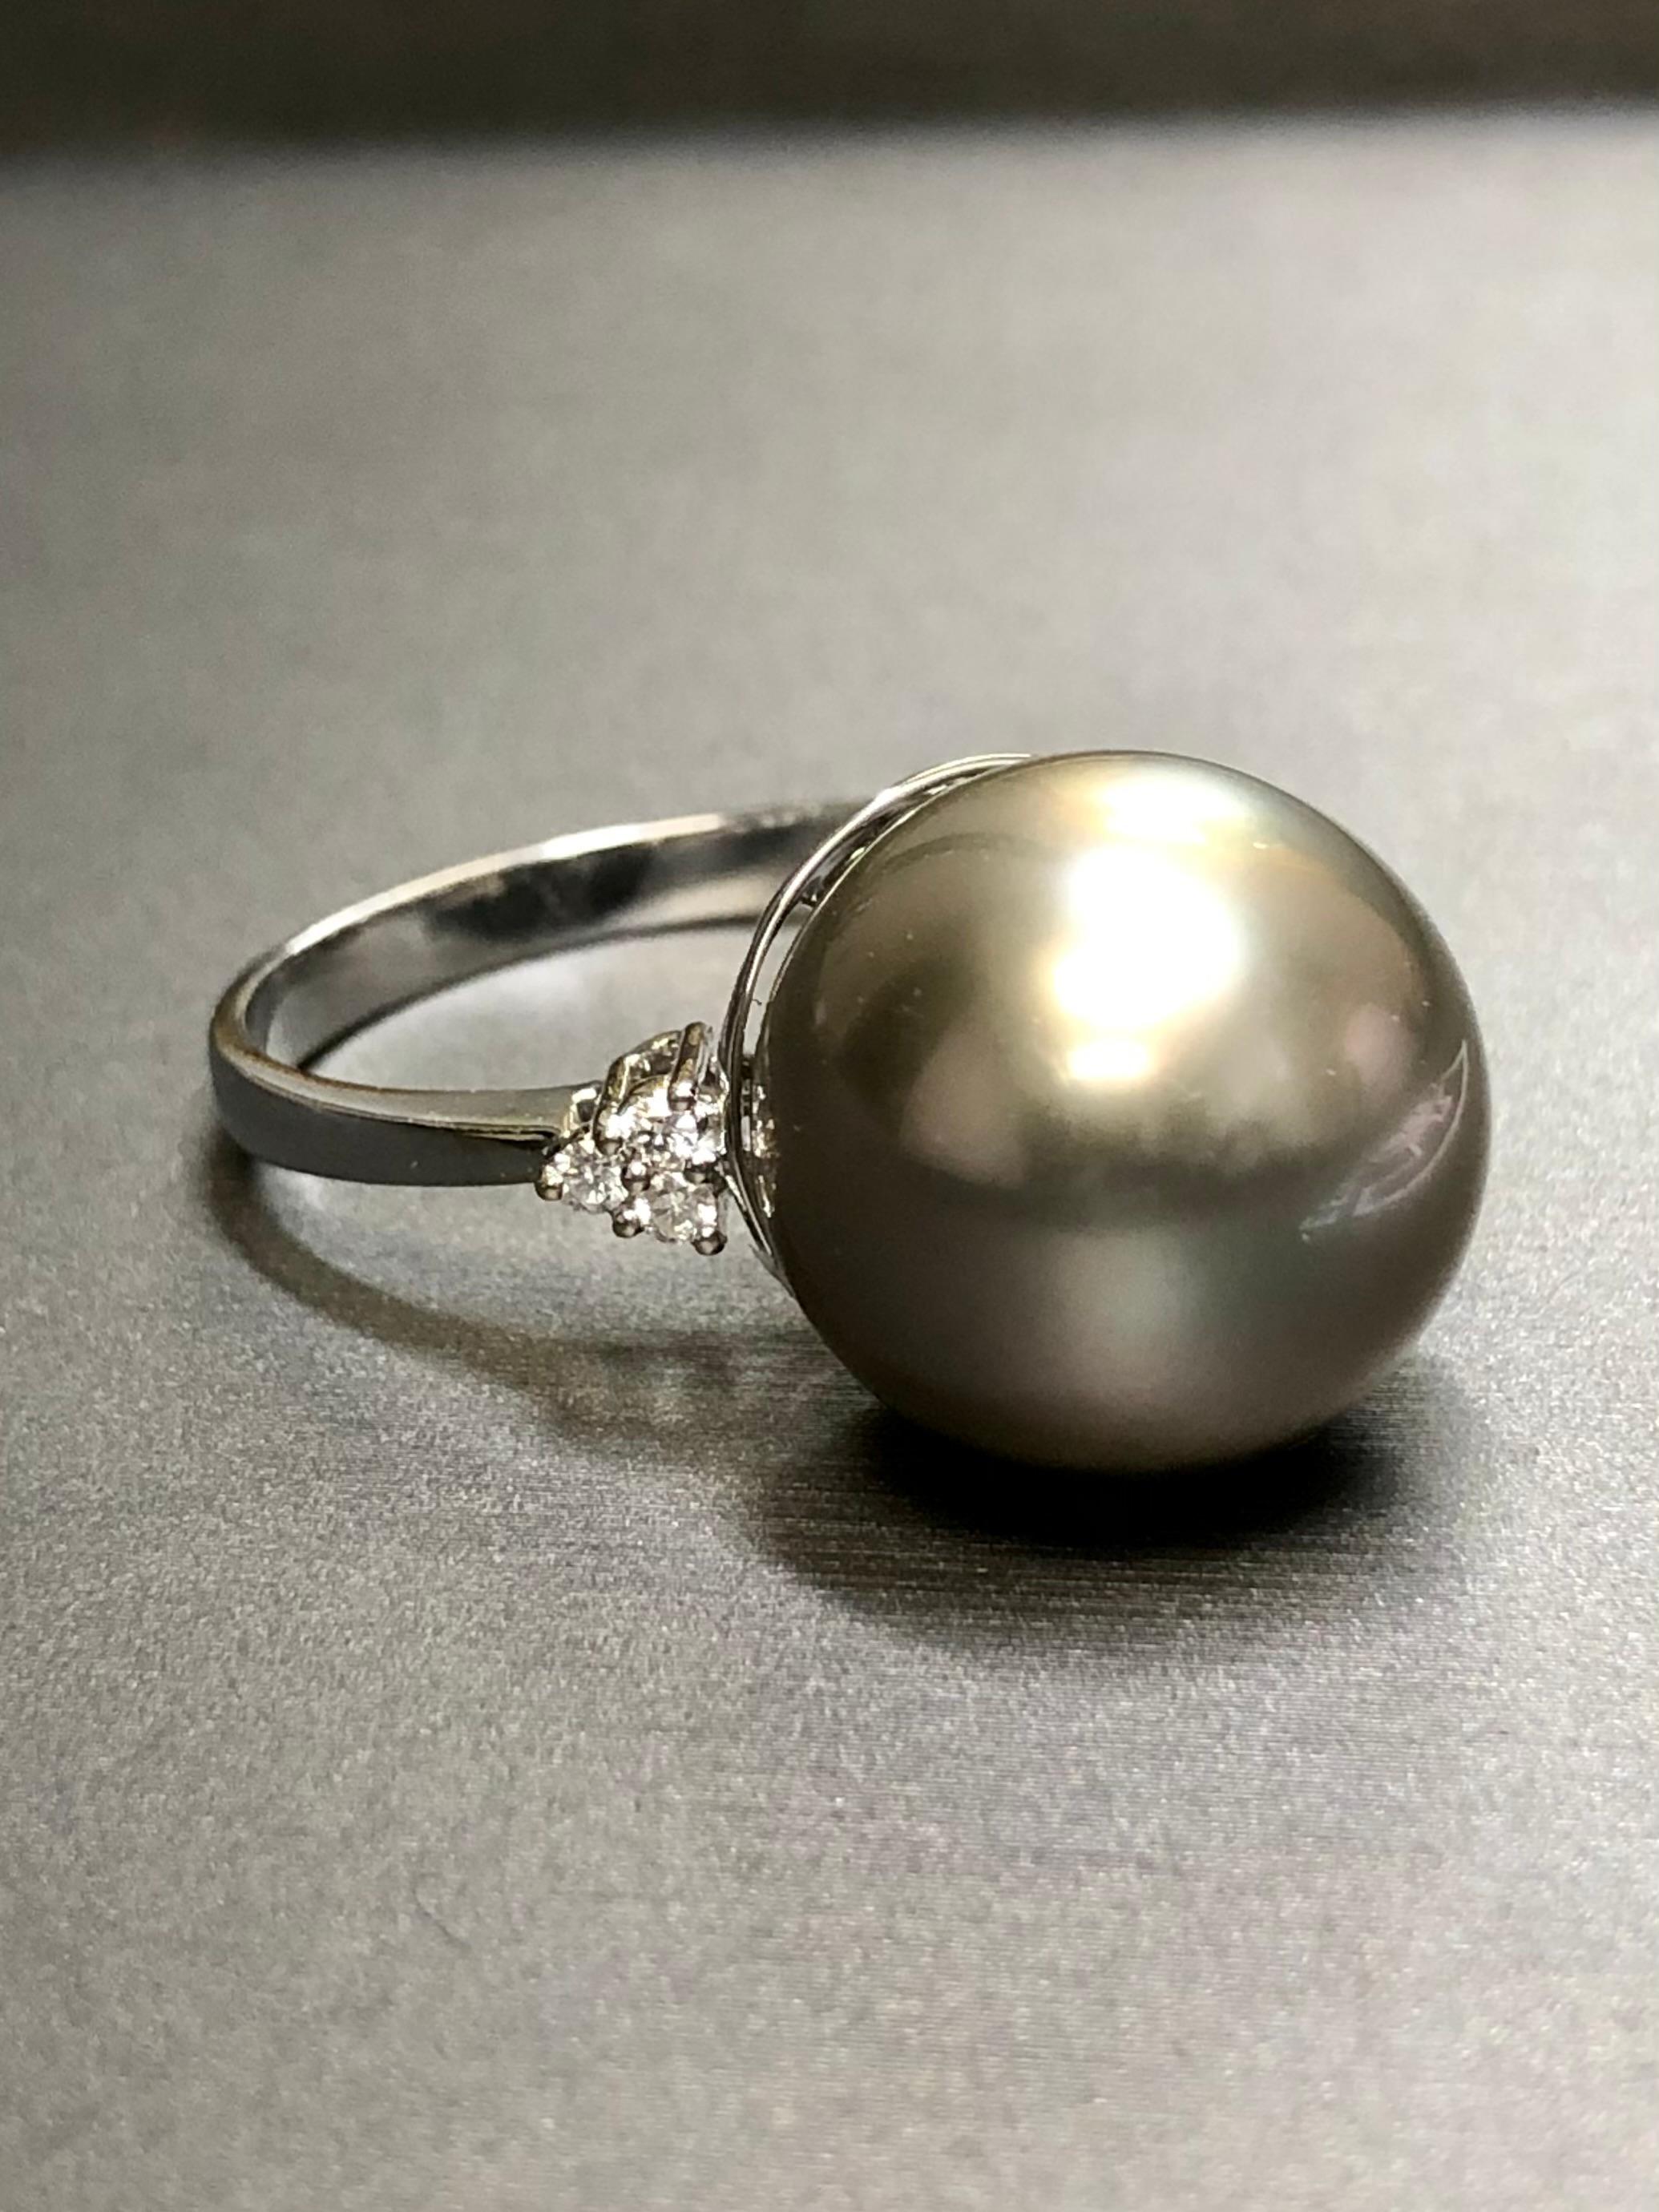 This beautiful vintage ring is centered by an impressive 16mm Tahitian pearl completely free of pitting or blemishes with a gorgeous even silver gray luster. Flanking the pearl is .12cttw in F-G Vs1 clarity round